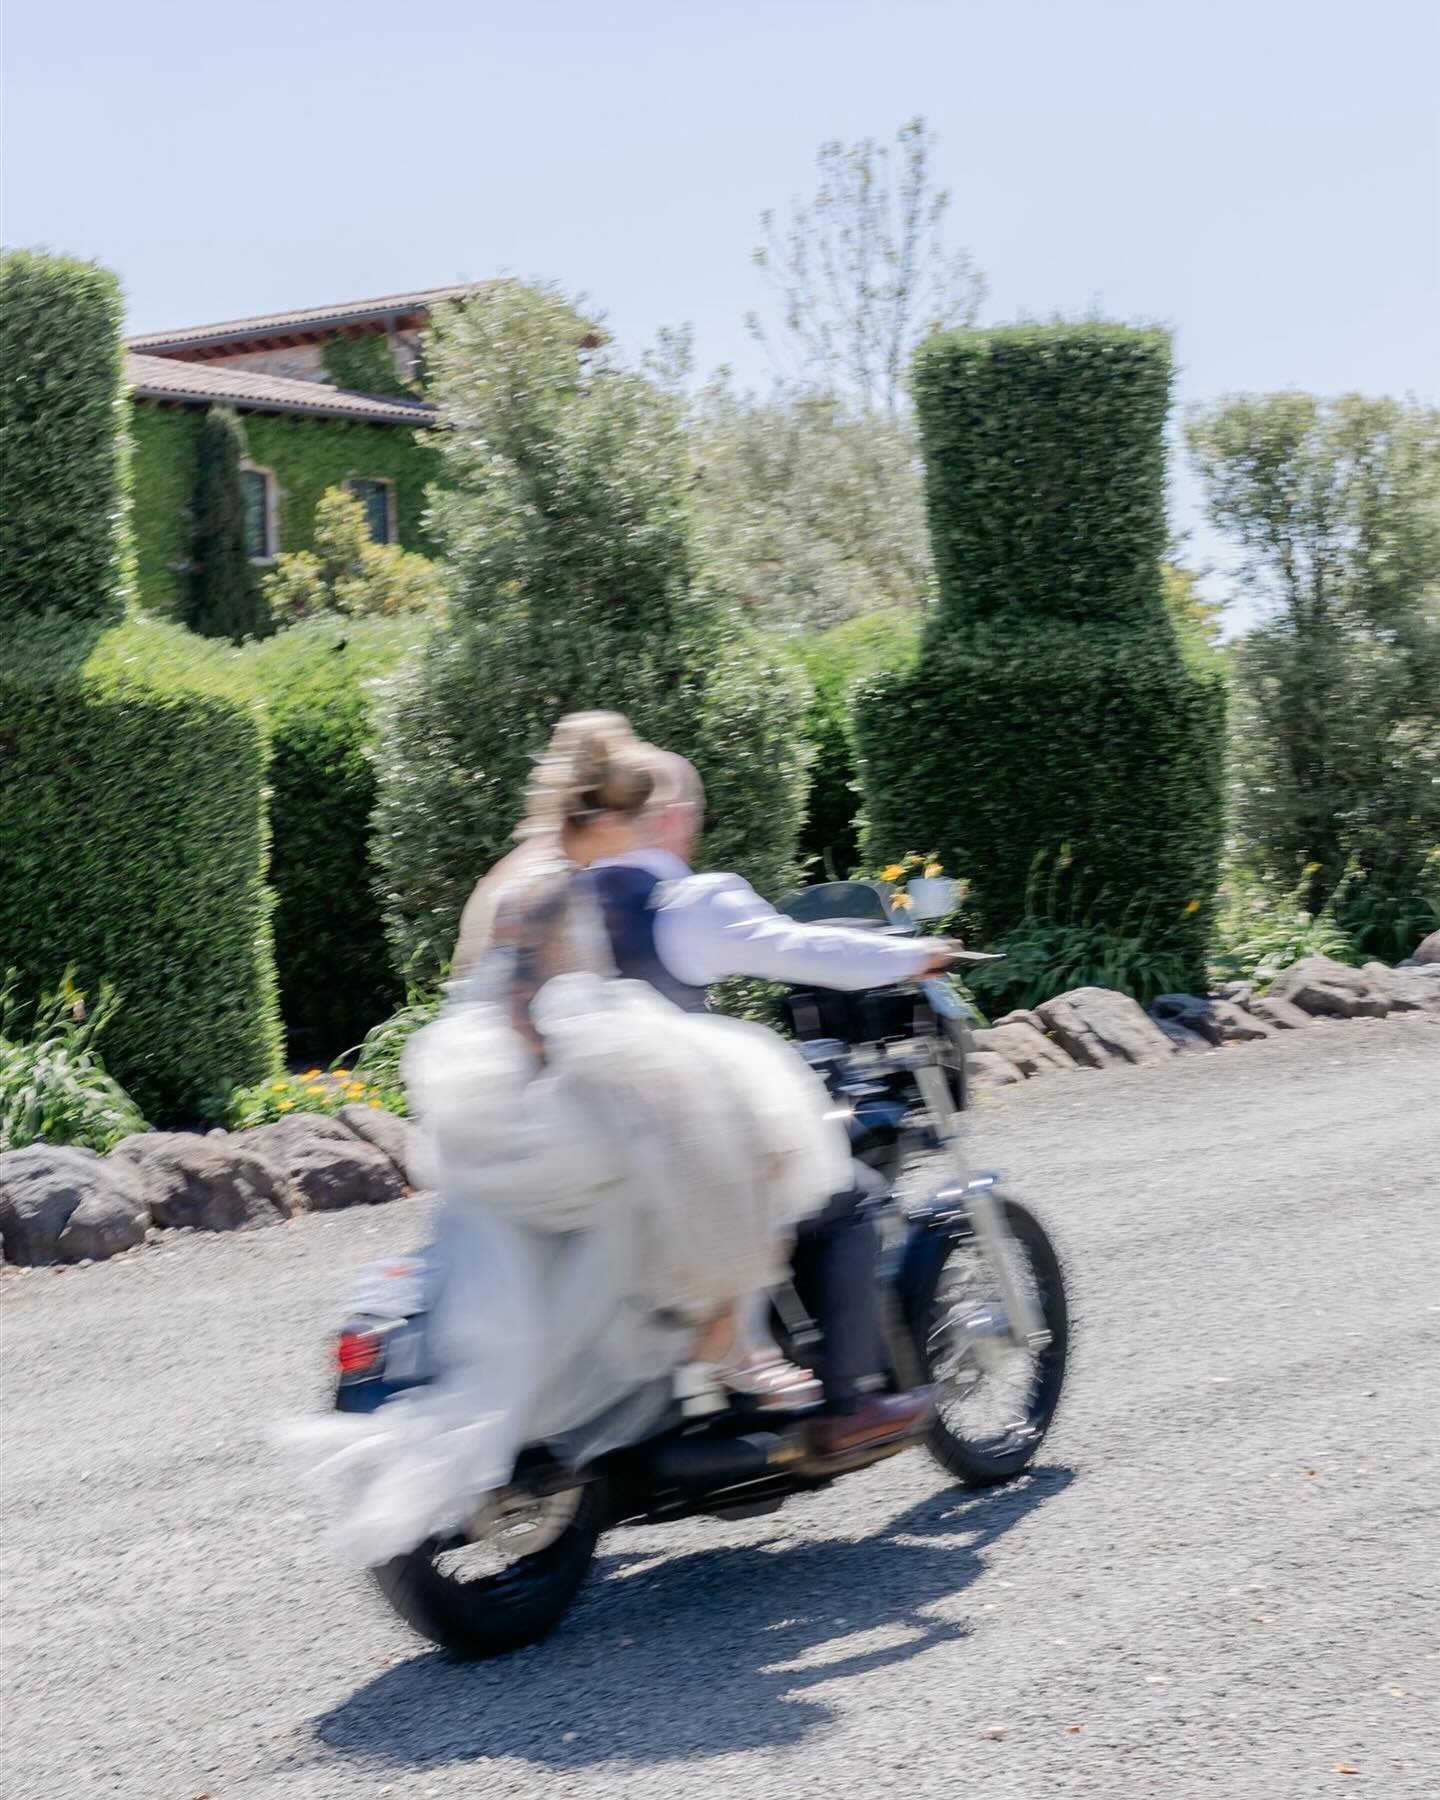 Zooming into the weekend! TGIF ✌🏼

Venue: @jacuzziwines 
Hair: @victoria.kerin &amp; @chelseaselbert 
Makeup: @luxebeautybylily 
Videography: @aftermoonproductions 
Models: @jol.ynnv2 @rowdyryan707 @mallorysmiiith &amp; Gavin